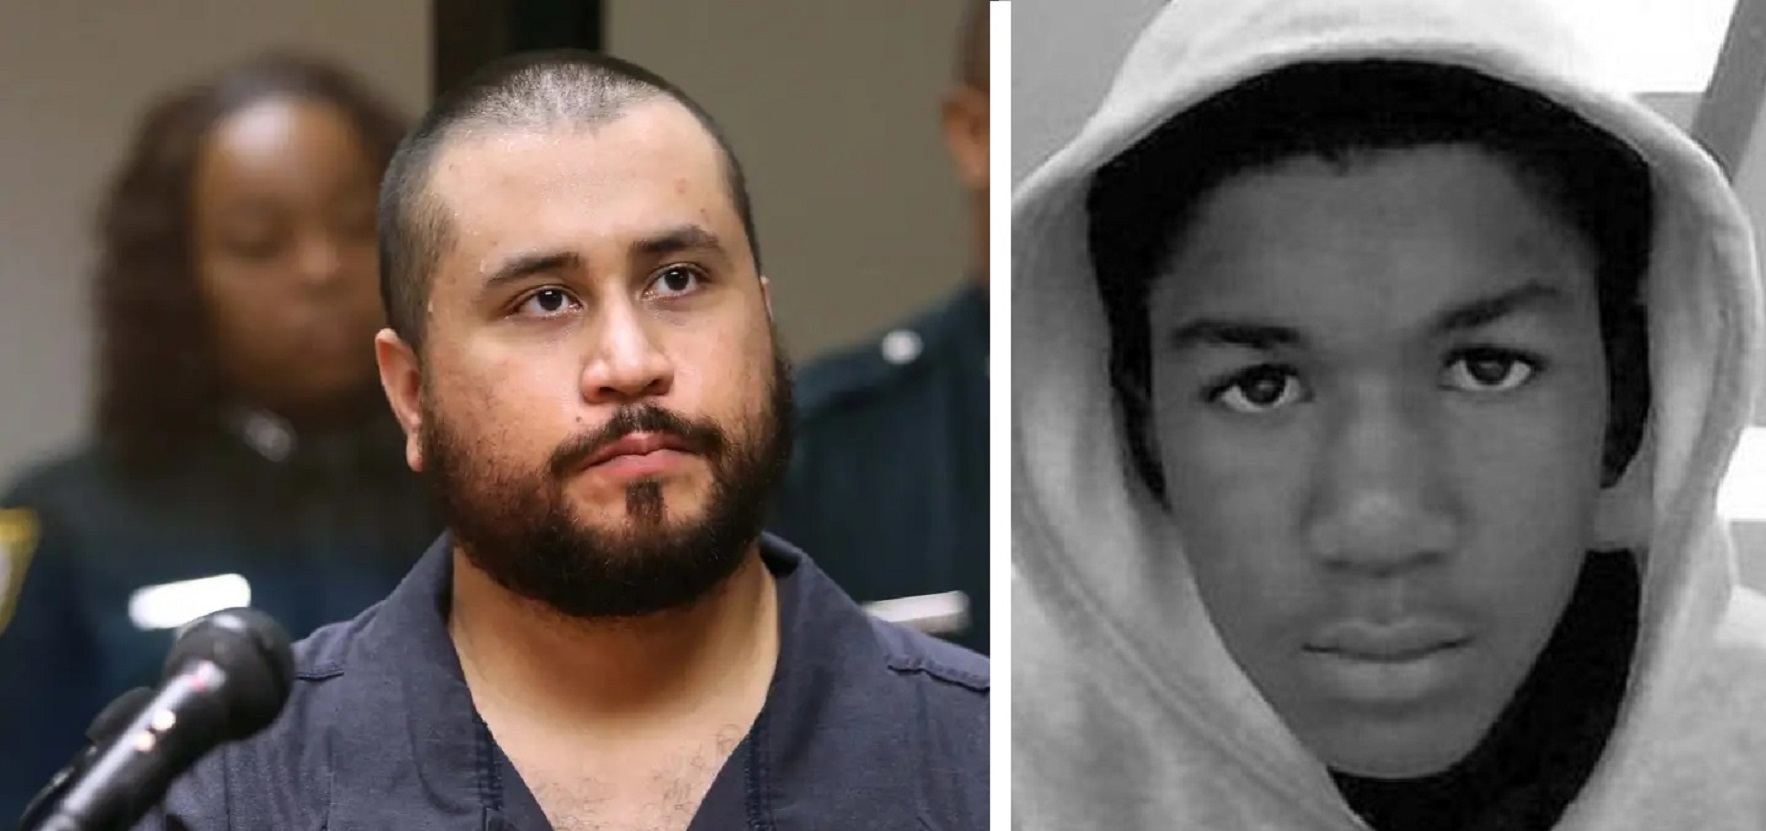 George Zimmerman Has Sued Trayvon Martin’s Family For $100 Million!